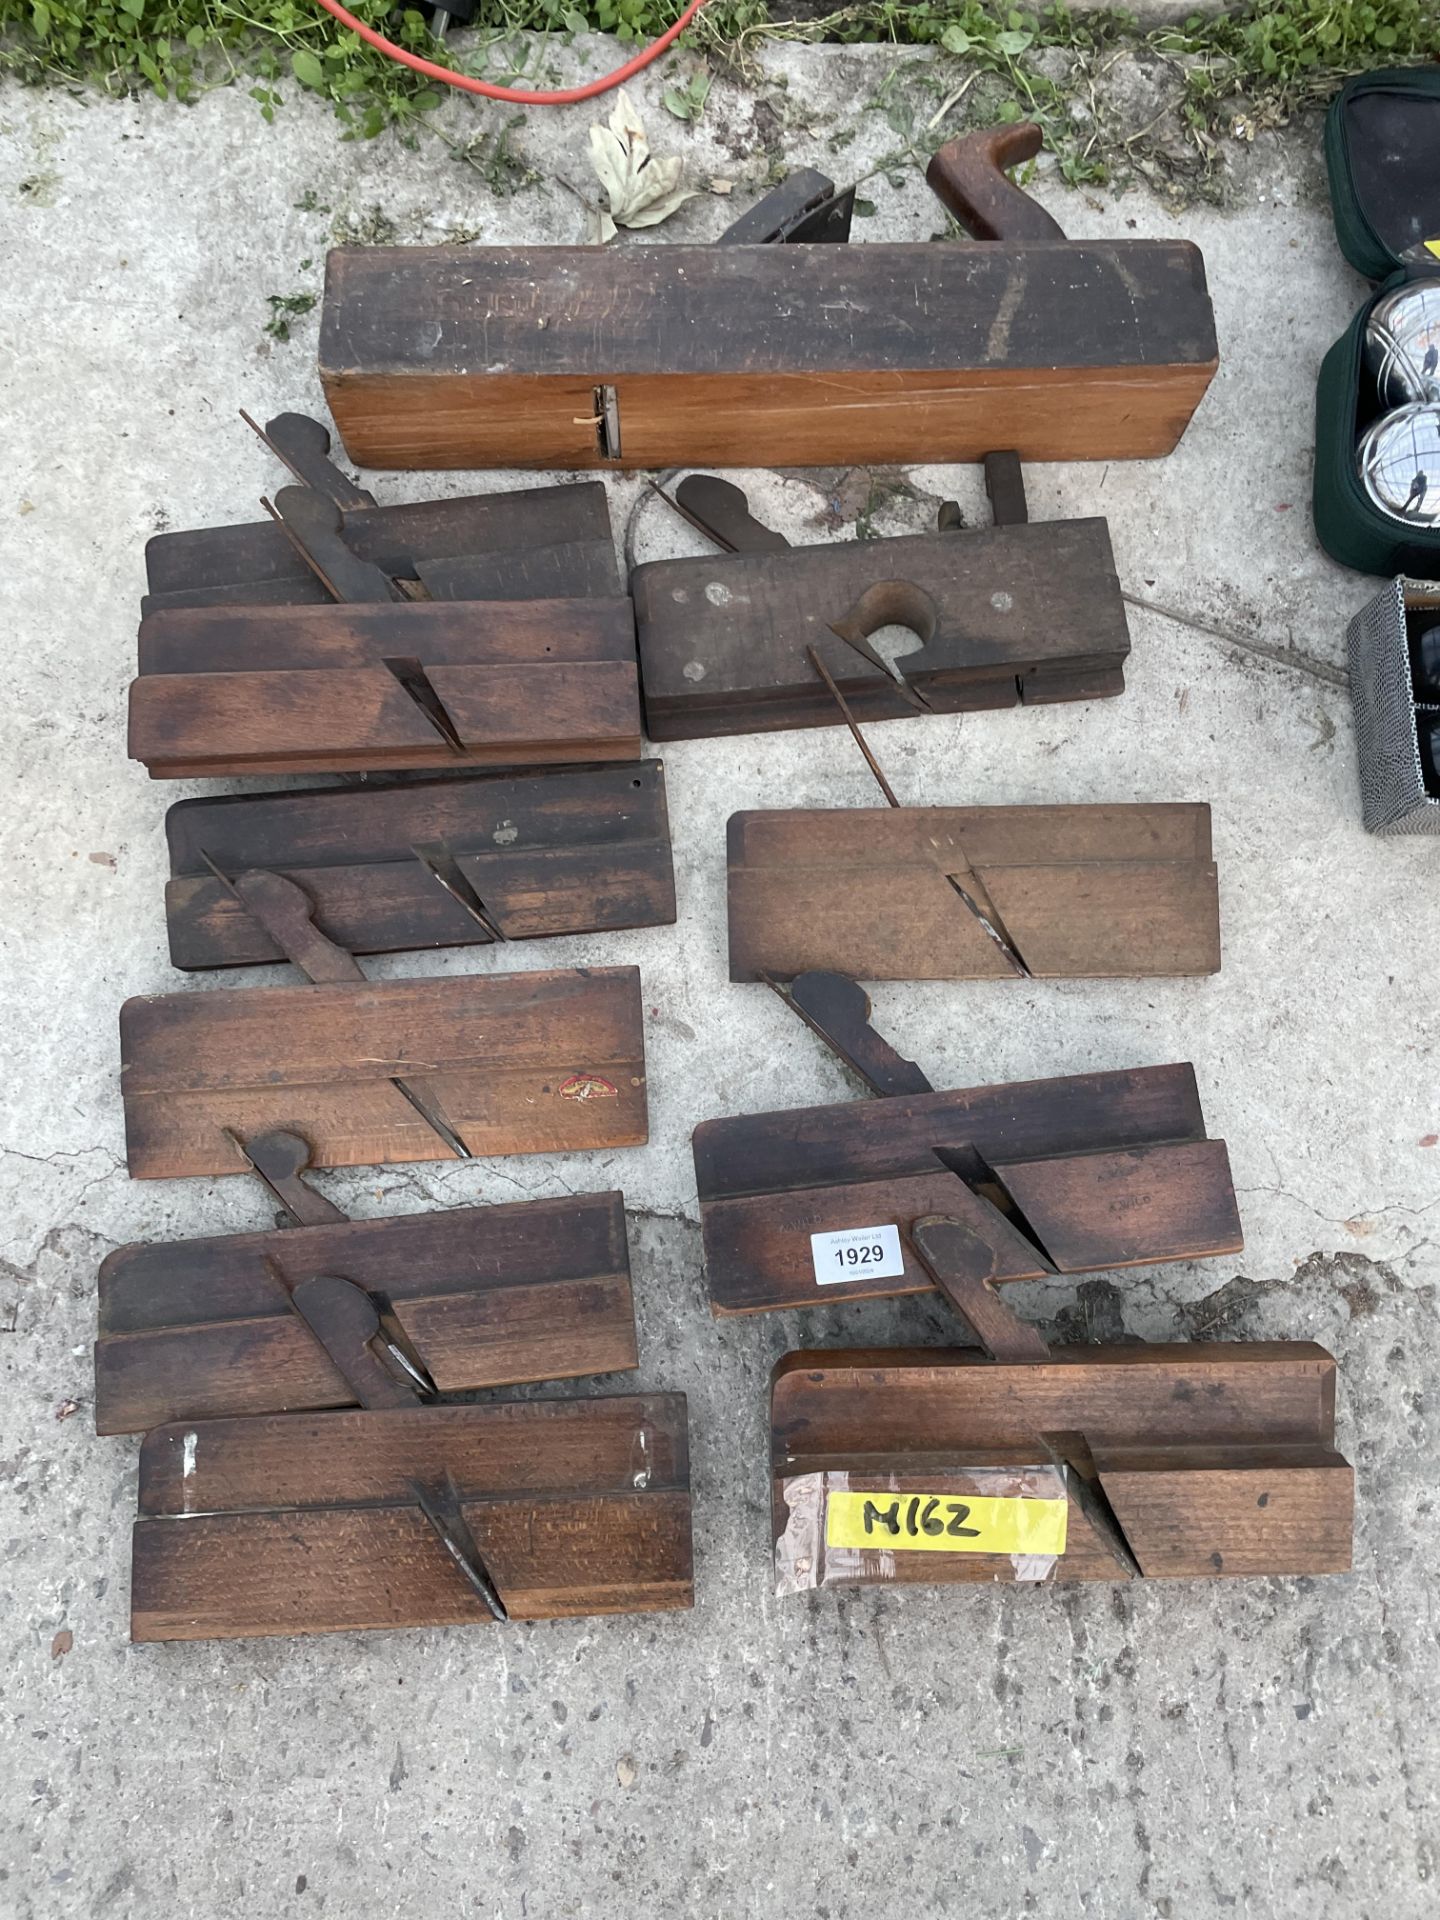 AN ASSORTMENT OF VINTAGE WOOD PLANES